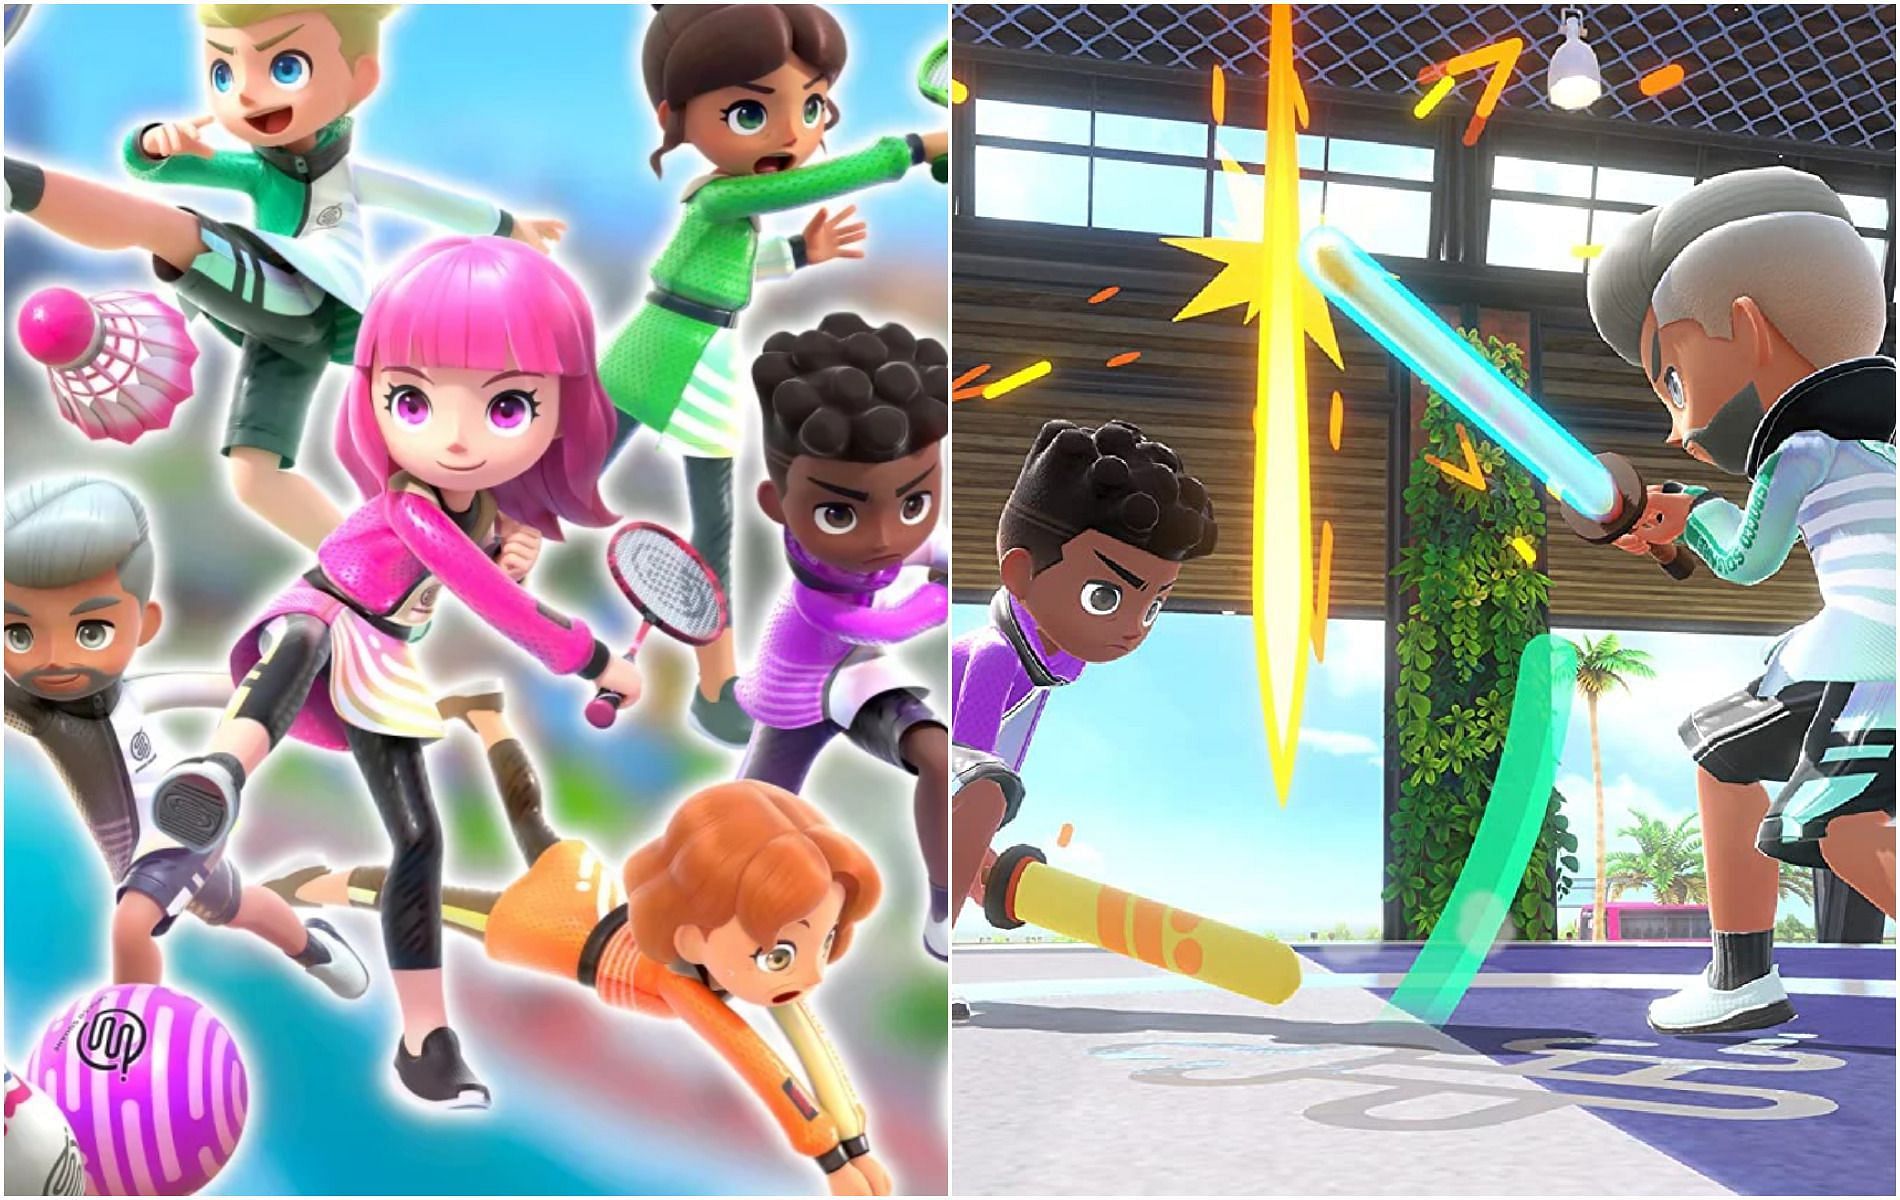 Duke it out with friends or strangers in the latest rendition of the iconic Sports series (Images via Nintendo)